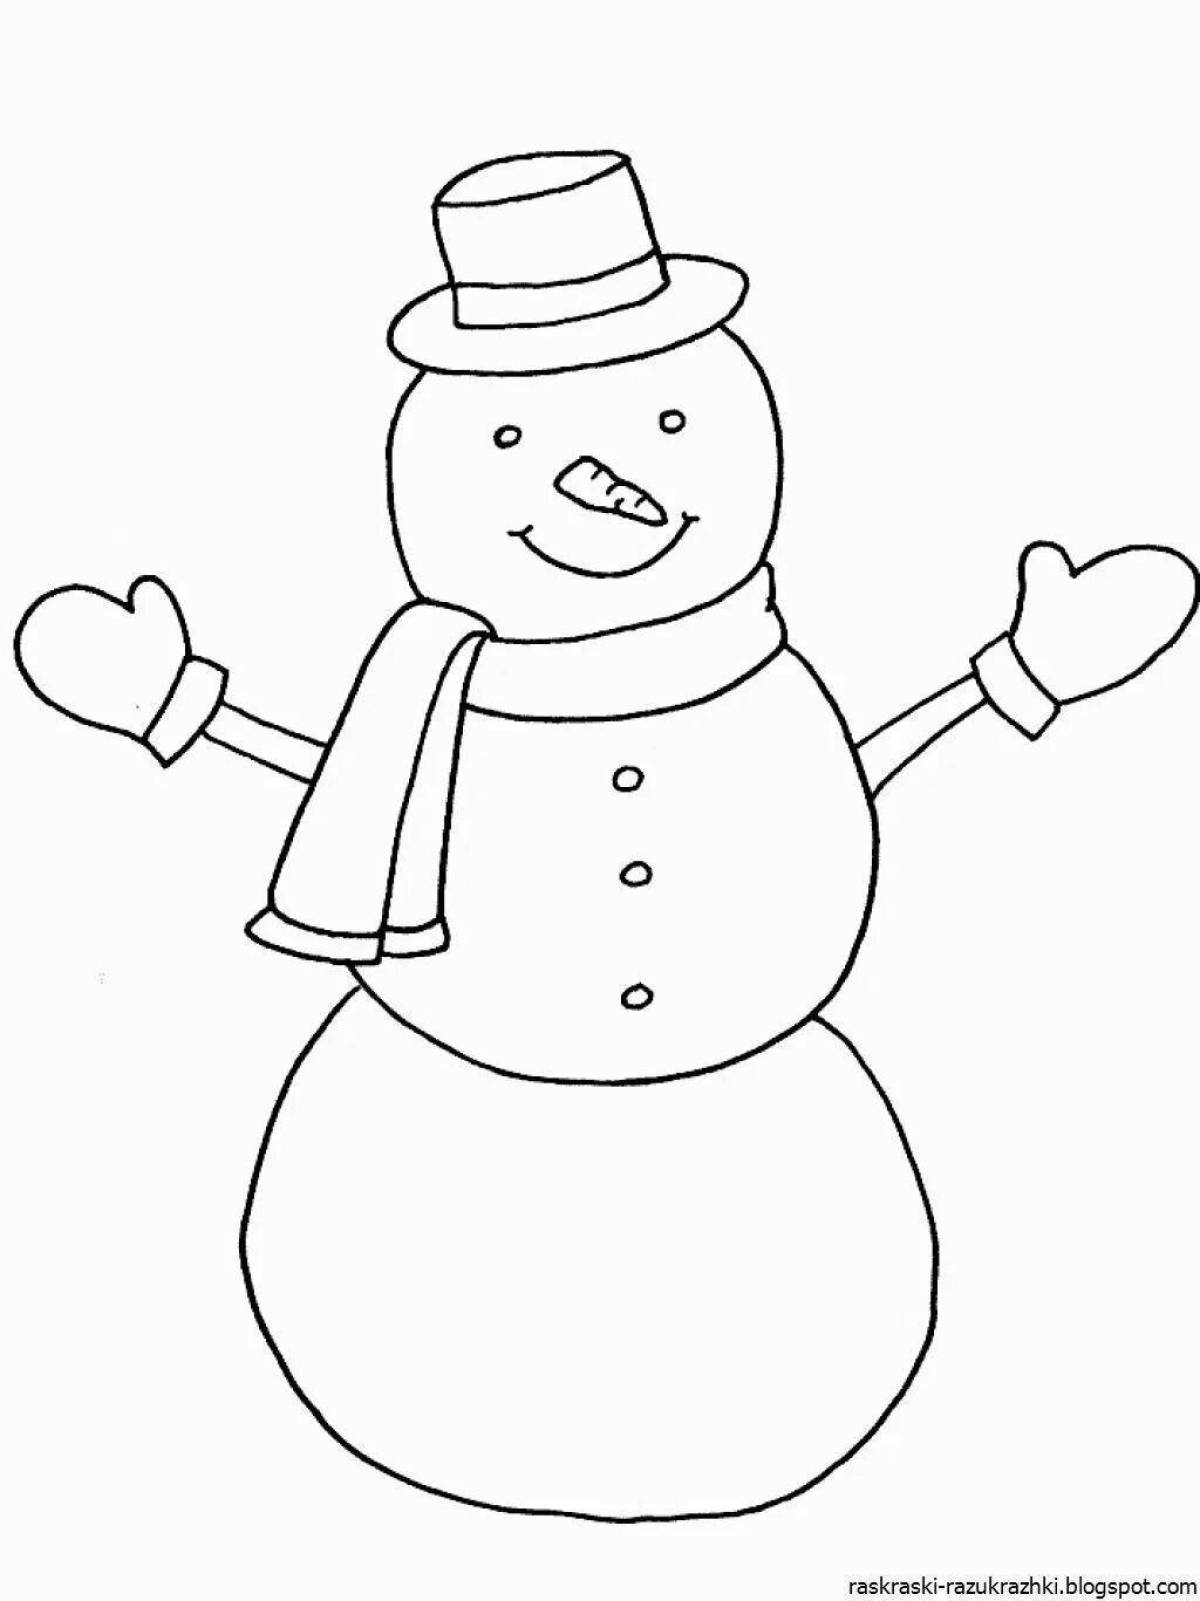 Naughty funny snowman coloring book for kids